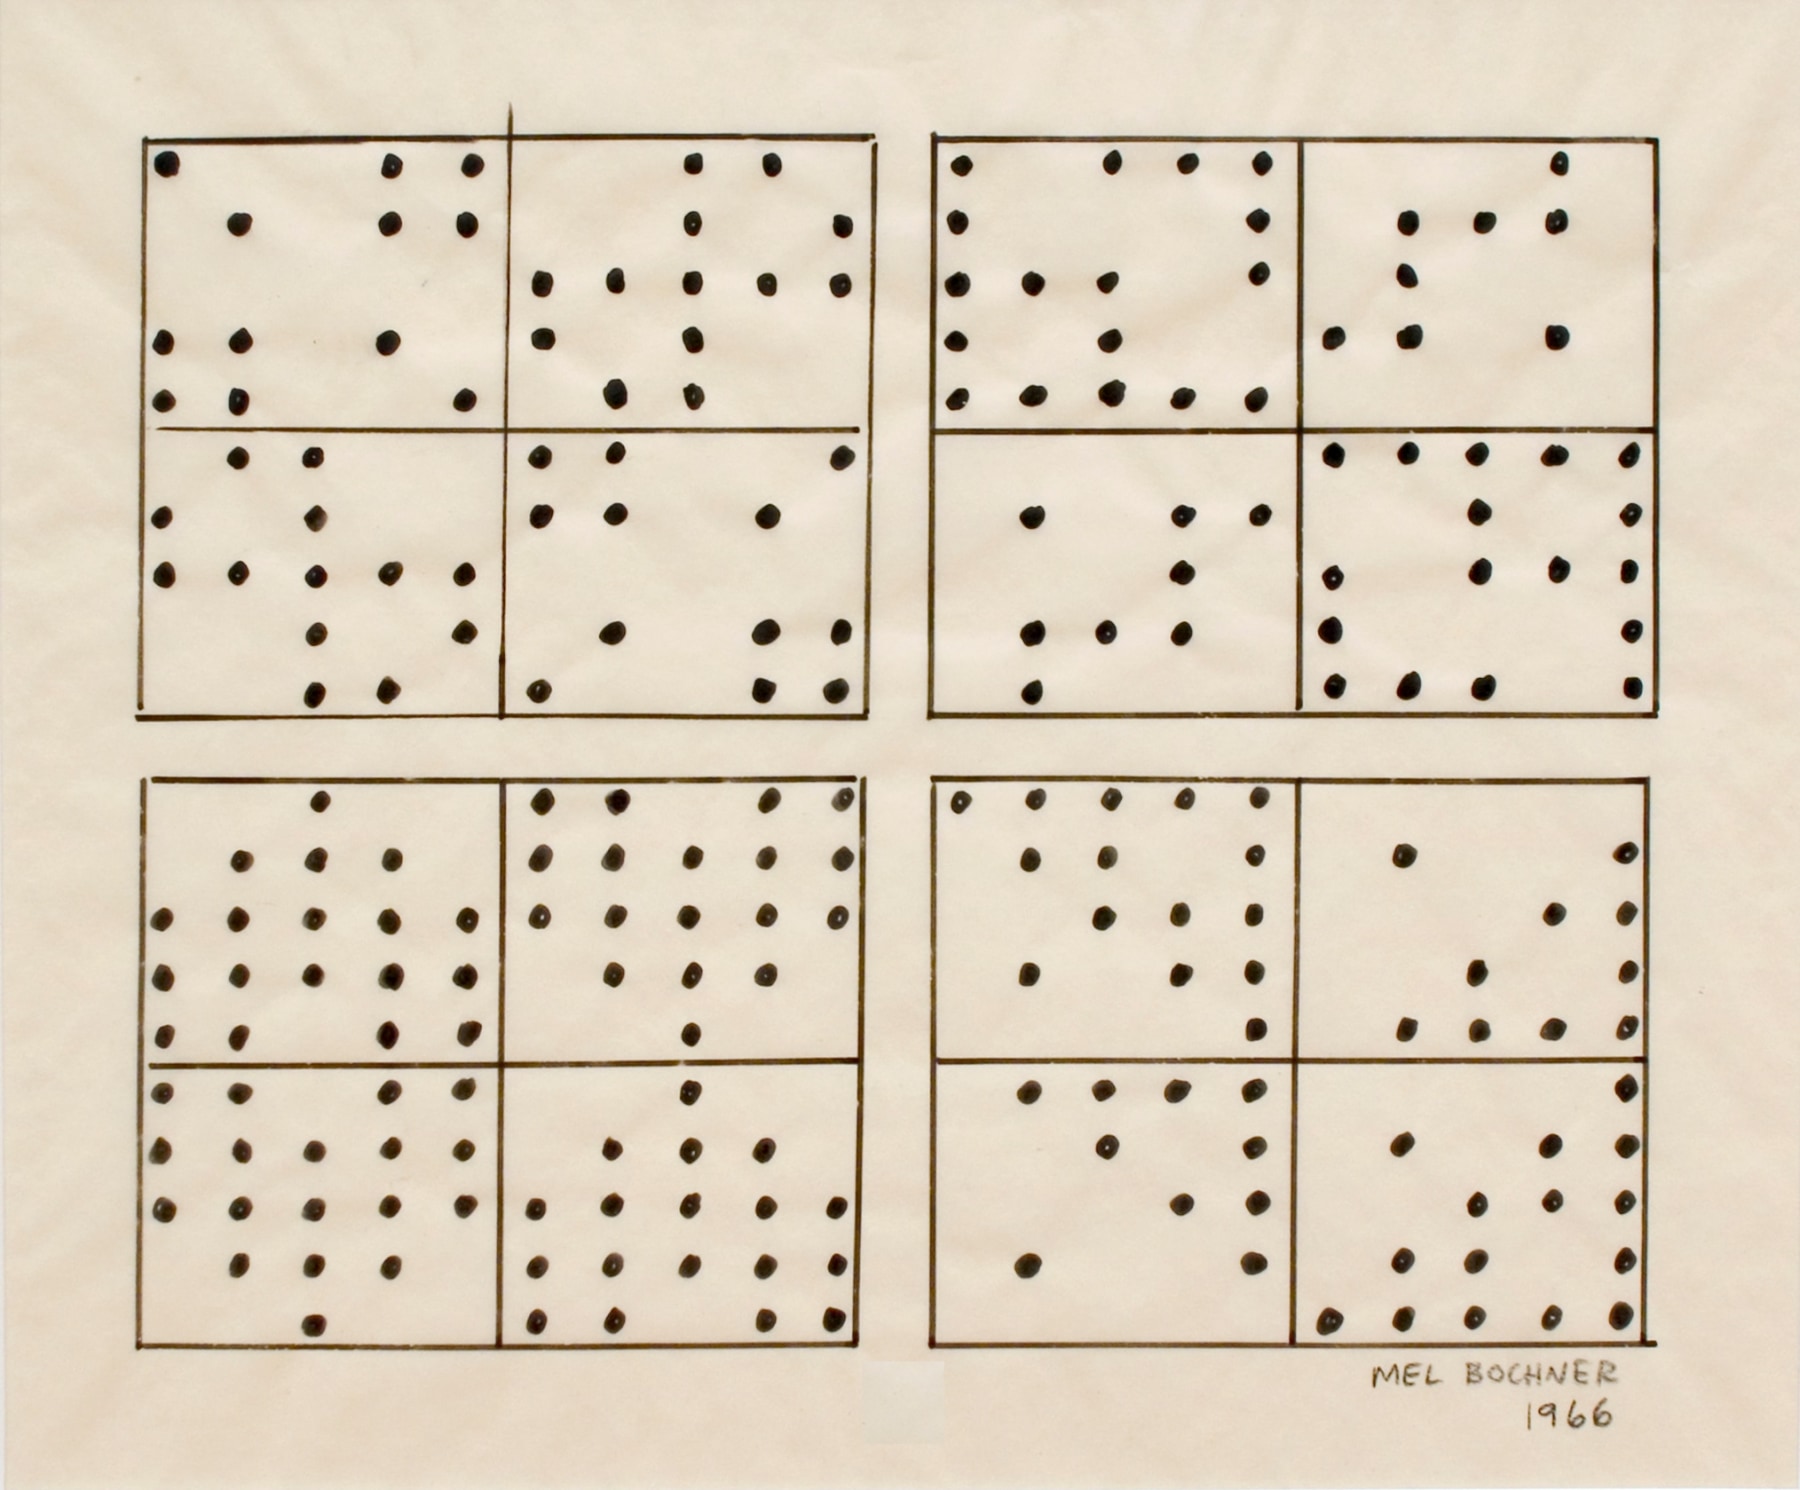 Mel Bochner,&nbsp;Four Sets: Rotations and Reversals, 1966. Ink on tracing paper, 12 x 15 inches.